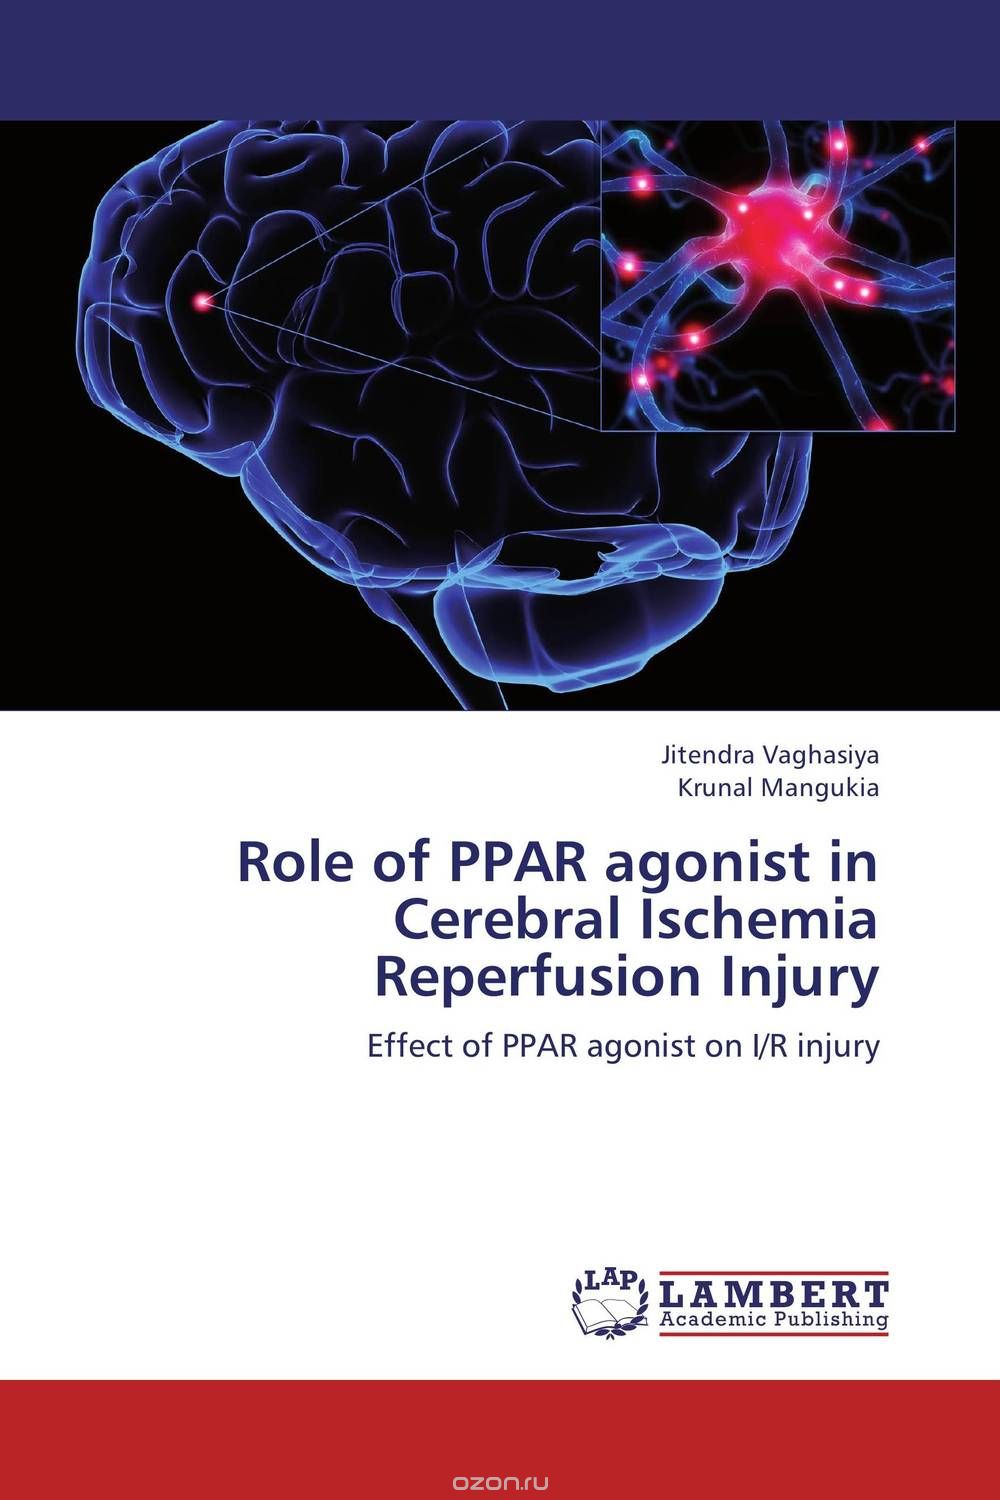 Скачать книгу "Role of PPAR agonist in Cerebral Ischemia Reperfusion Injury"